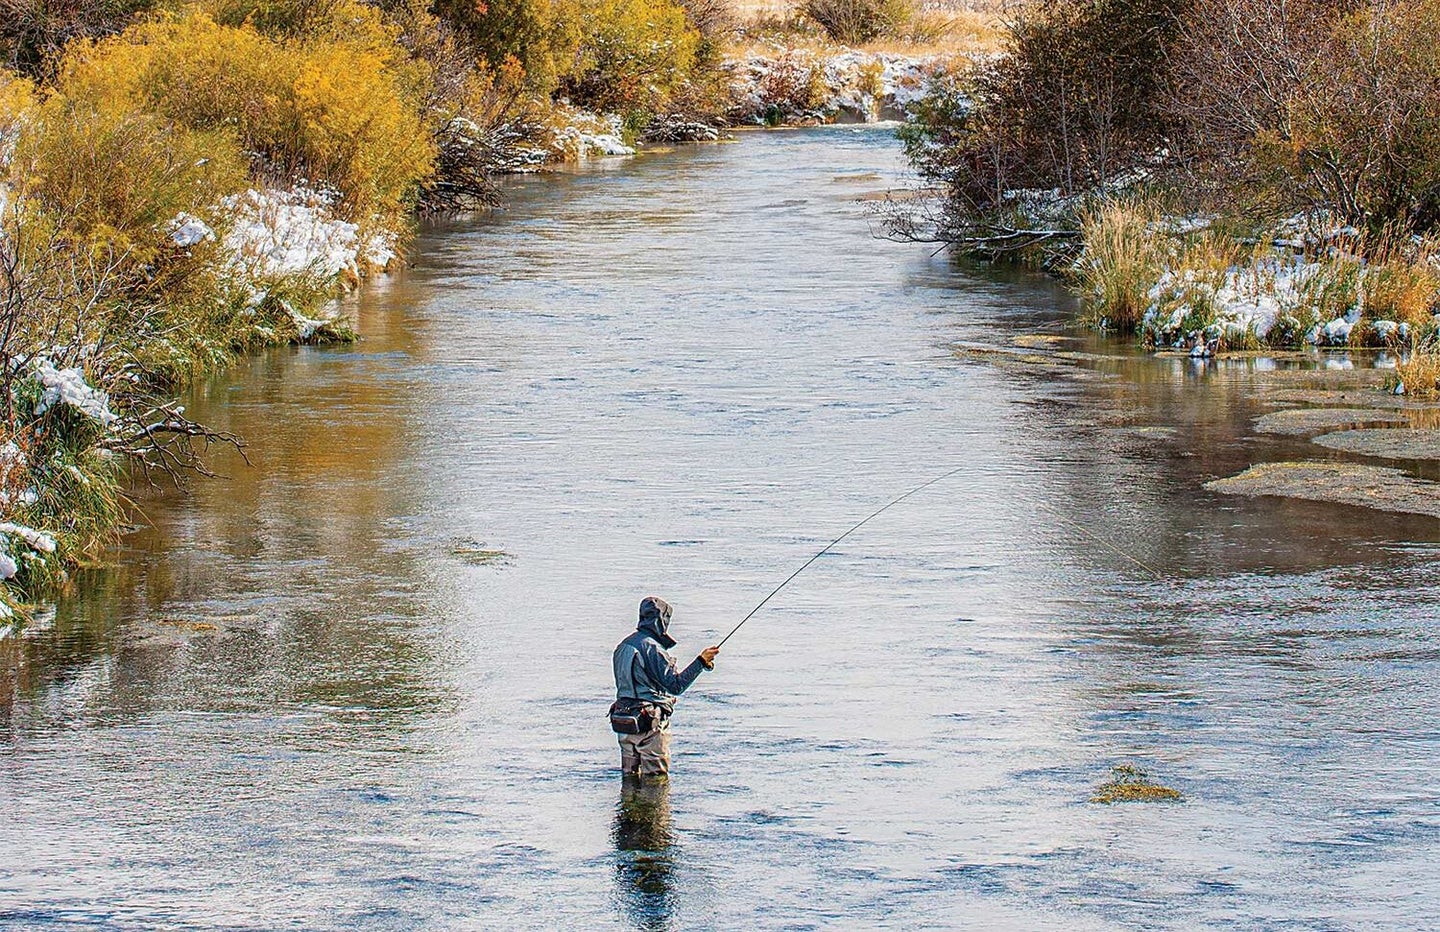 A fly angler fishing for steelhead trout in a stream.